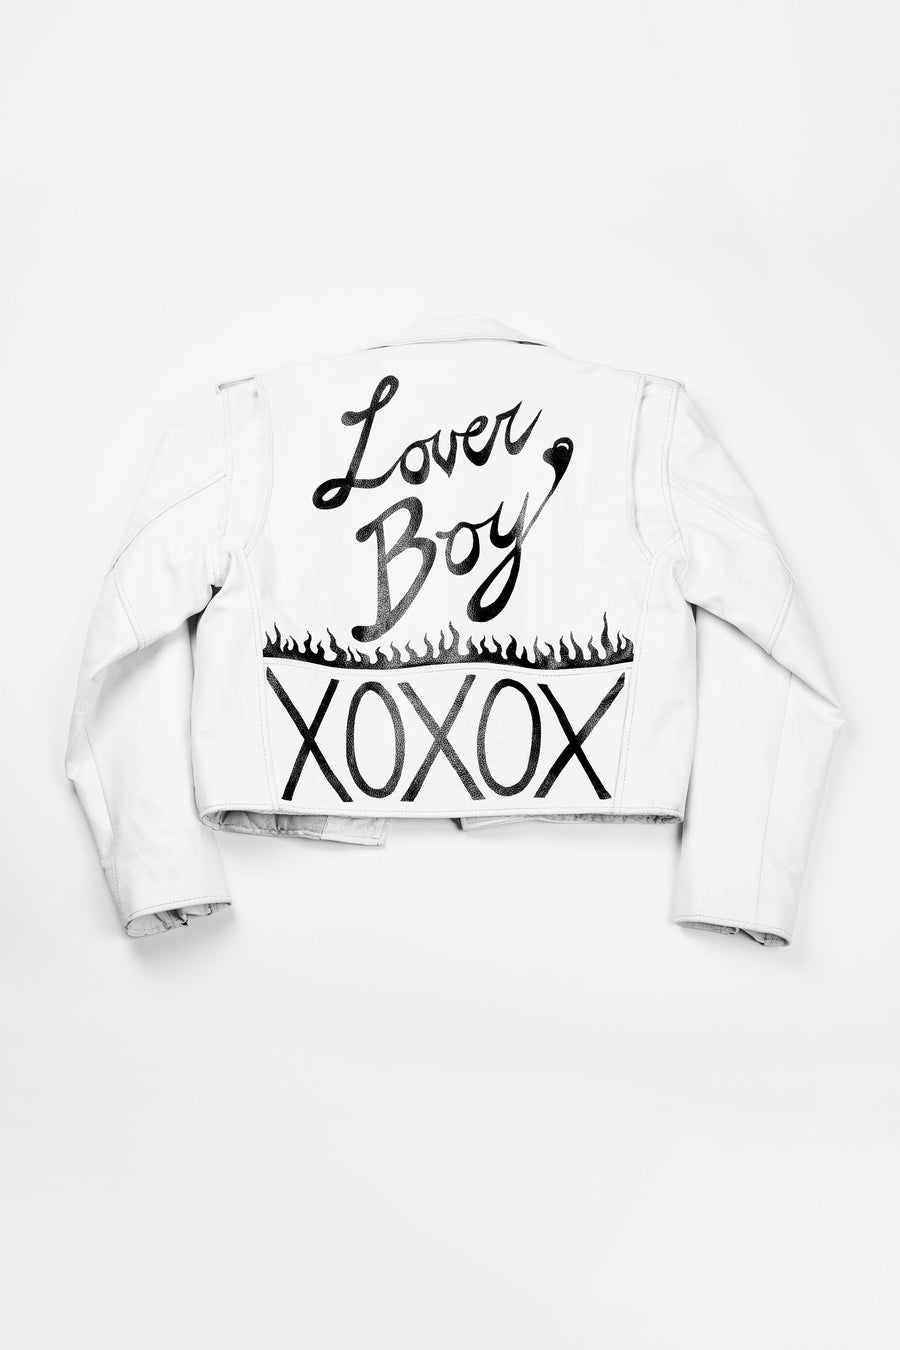 loverboy.  painted leather jacket.